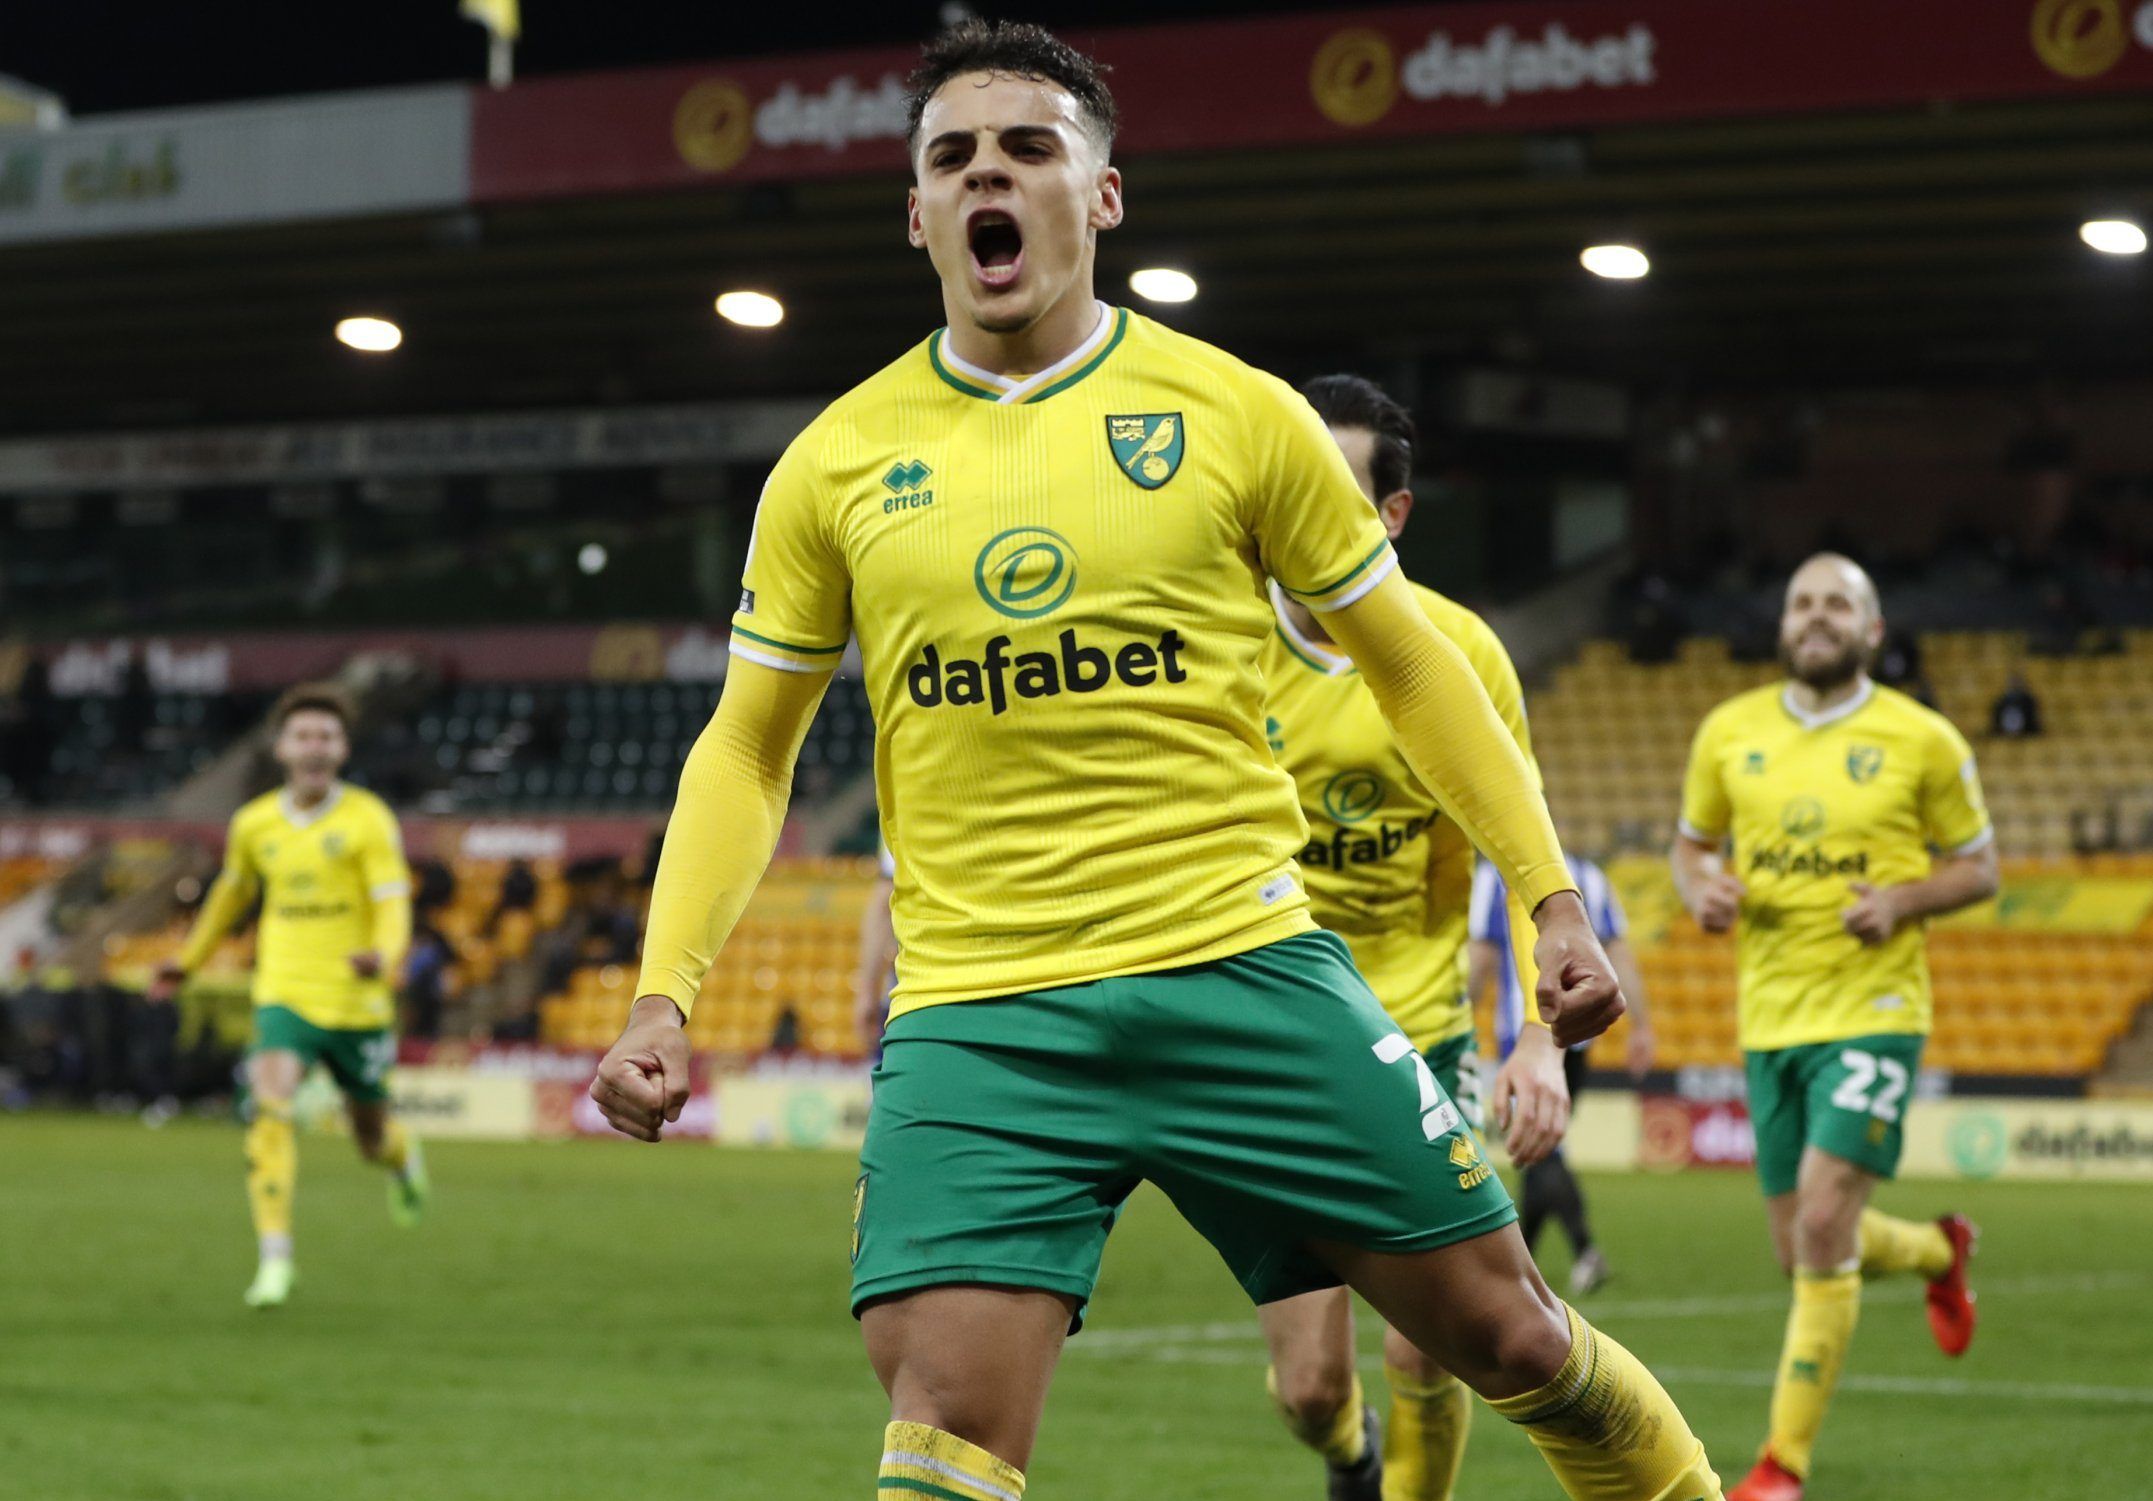 norwich right back max aarons celebrates scoring vs wednesday spurs transfer rumours jose mourinho target levy